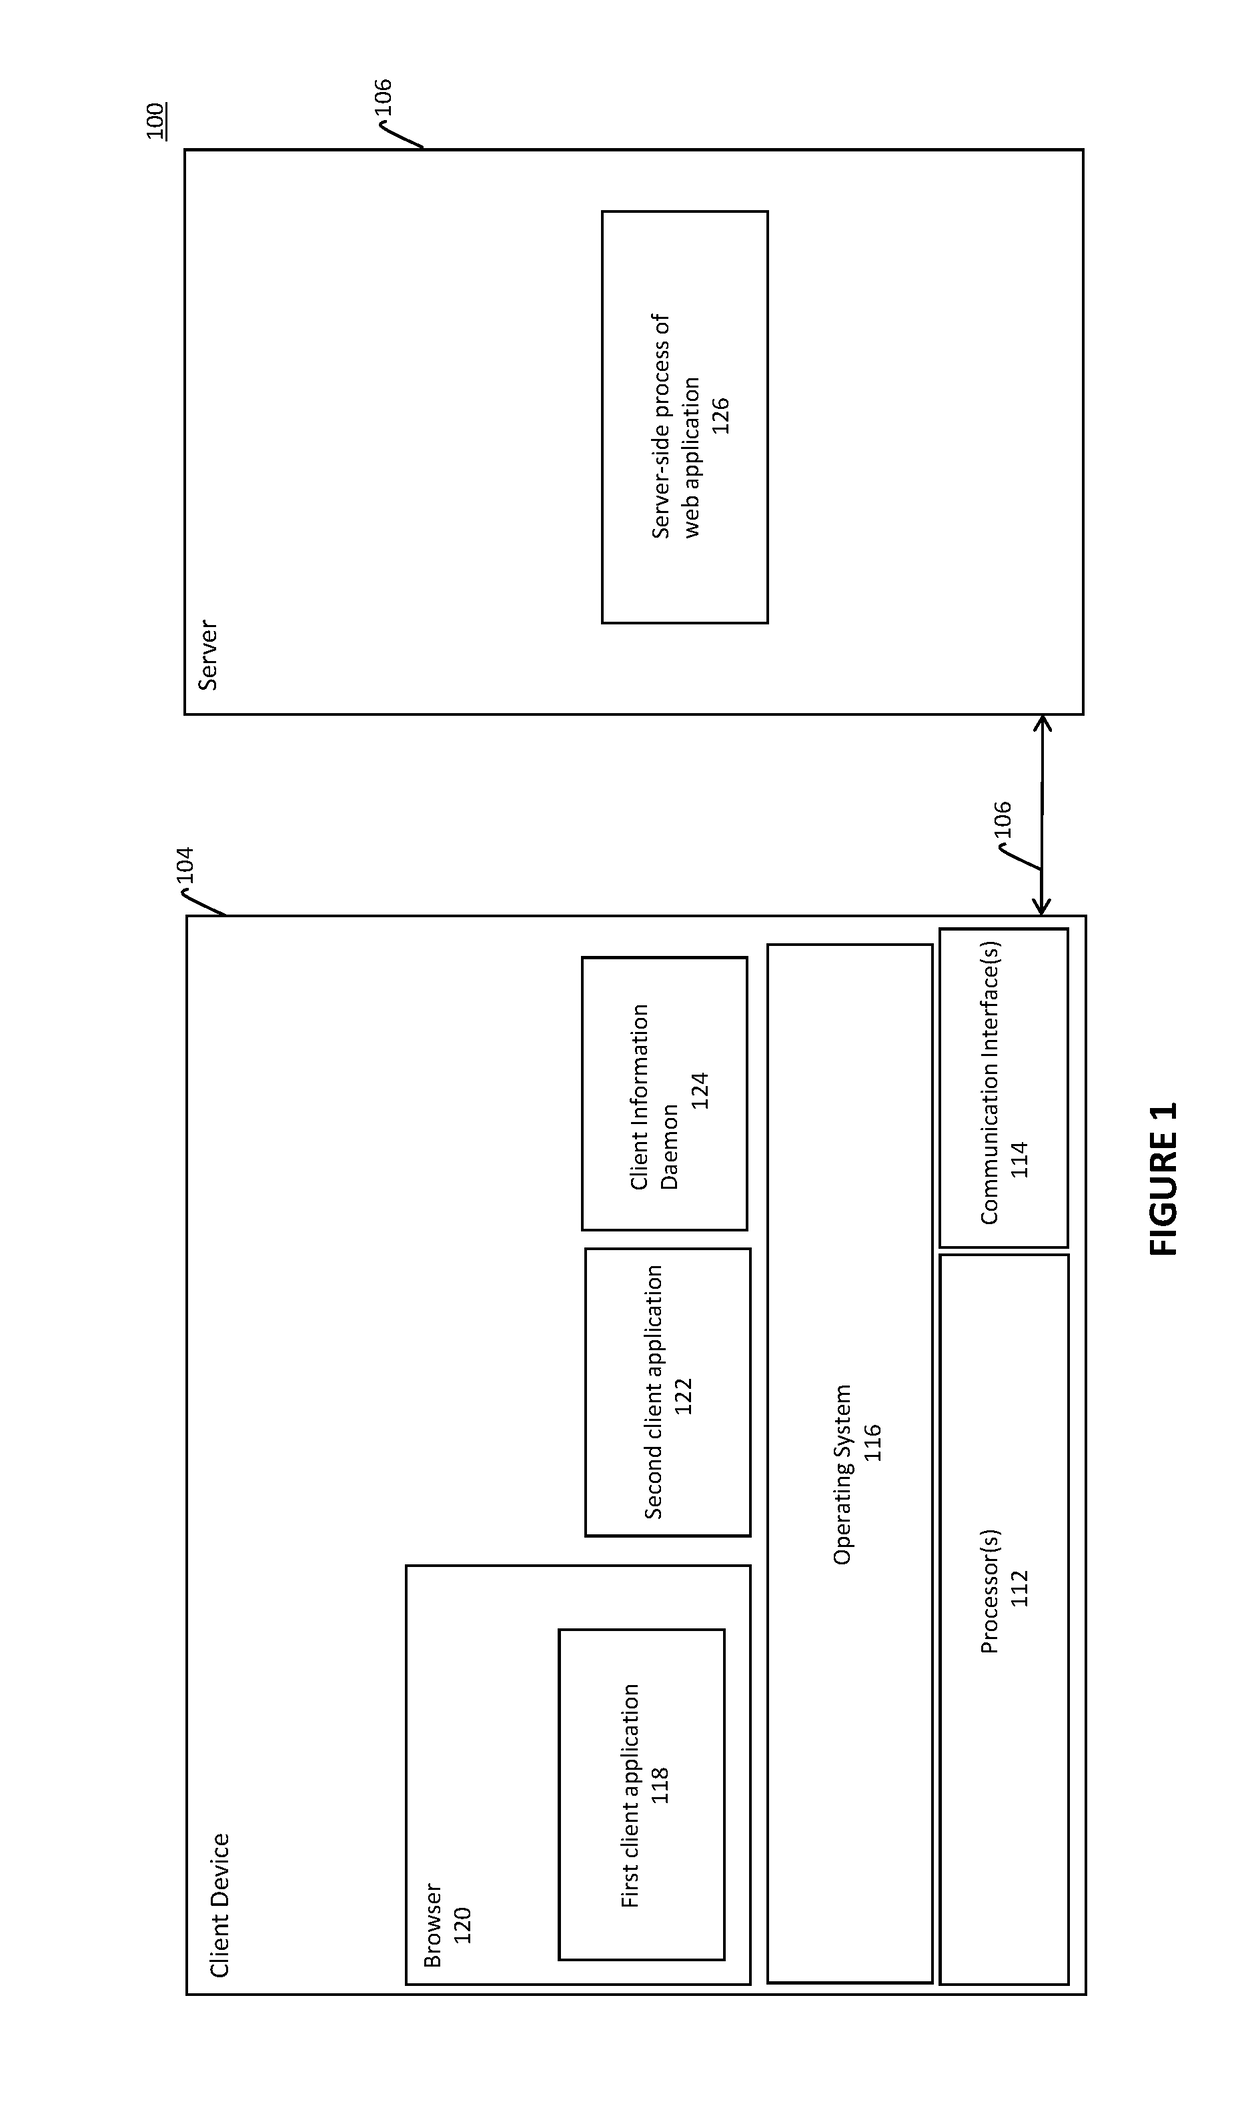 Client Device Information for Controlling Access to Web Applications